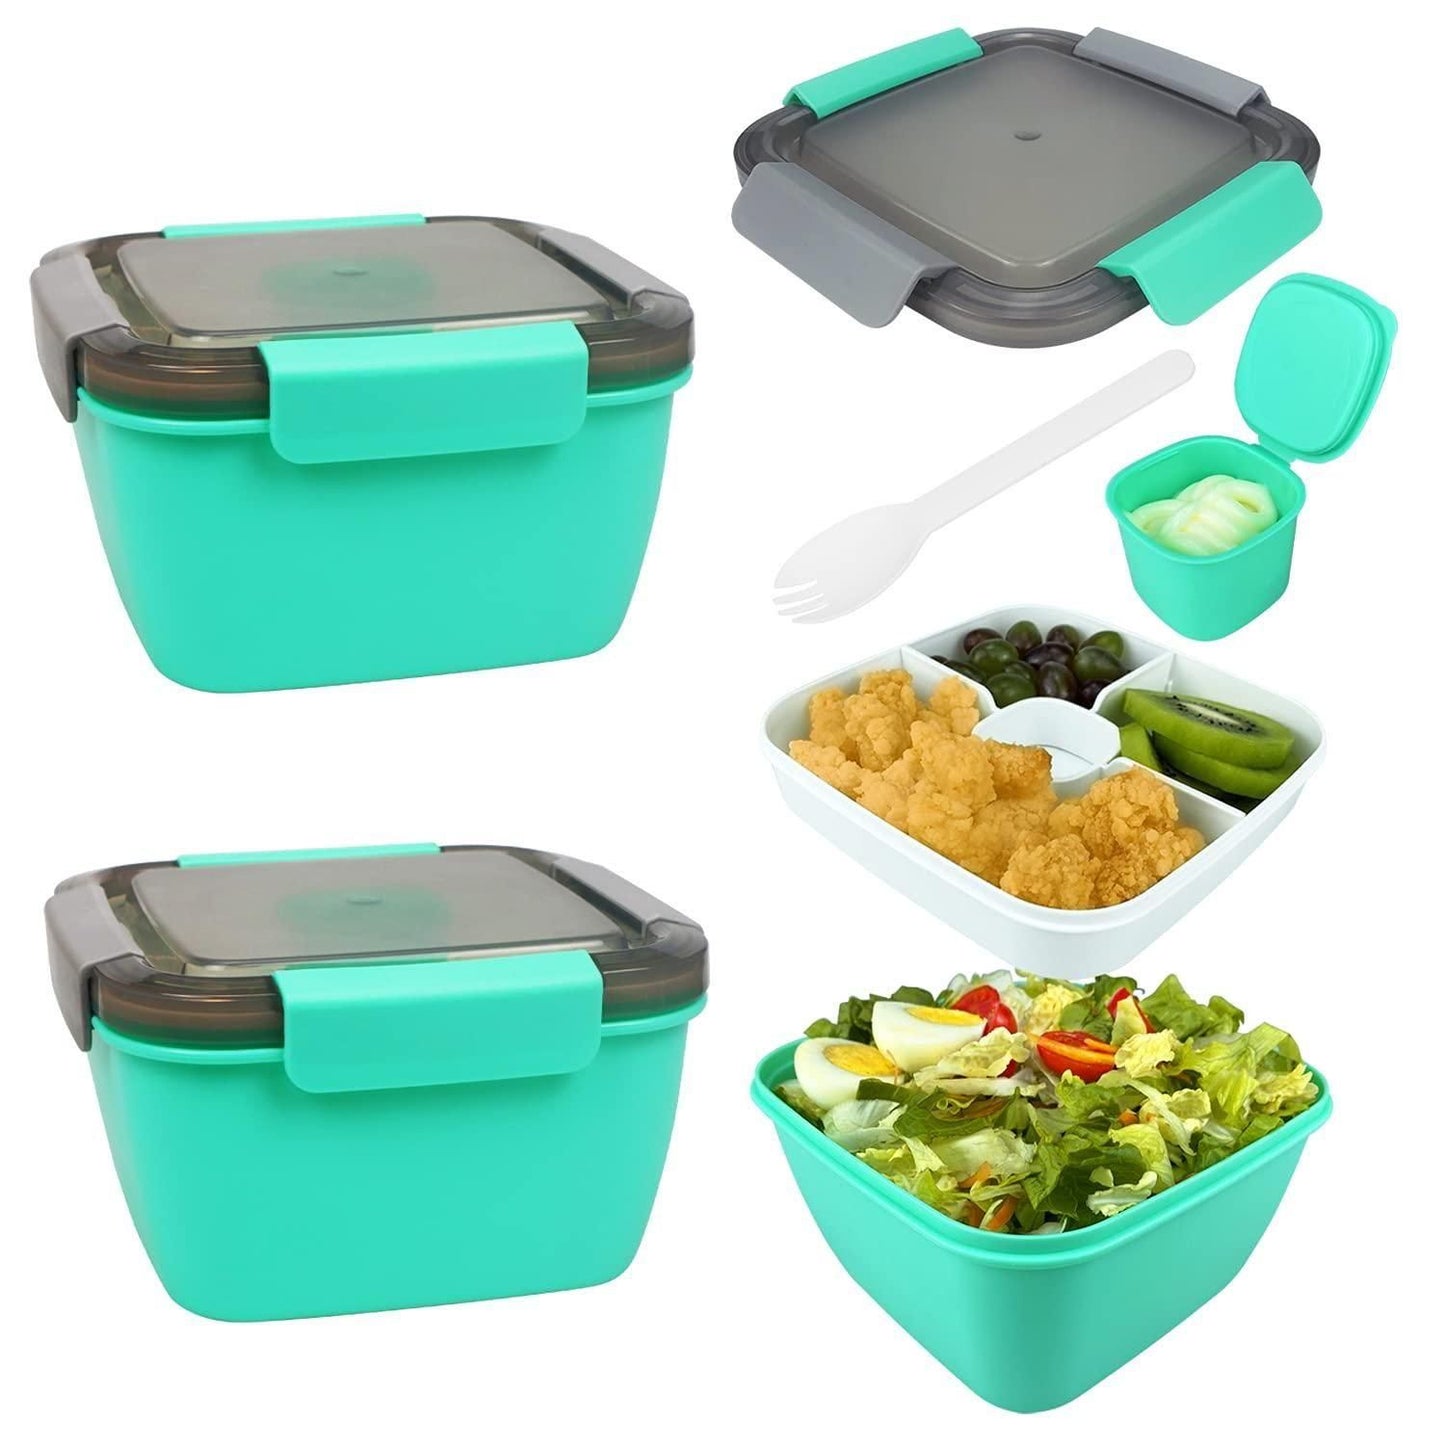 Triple Taste Lunch Box: 3-Section Meal Box